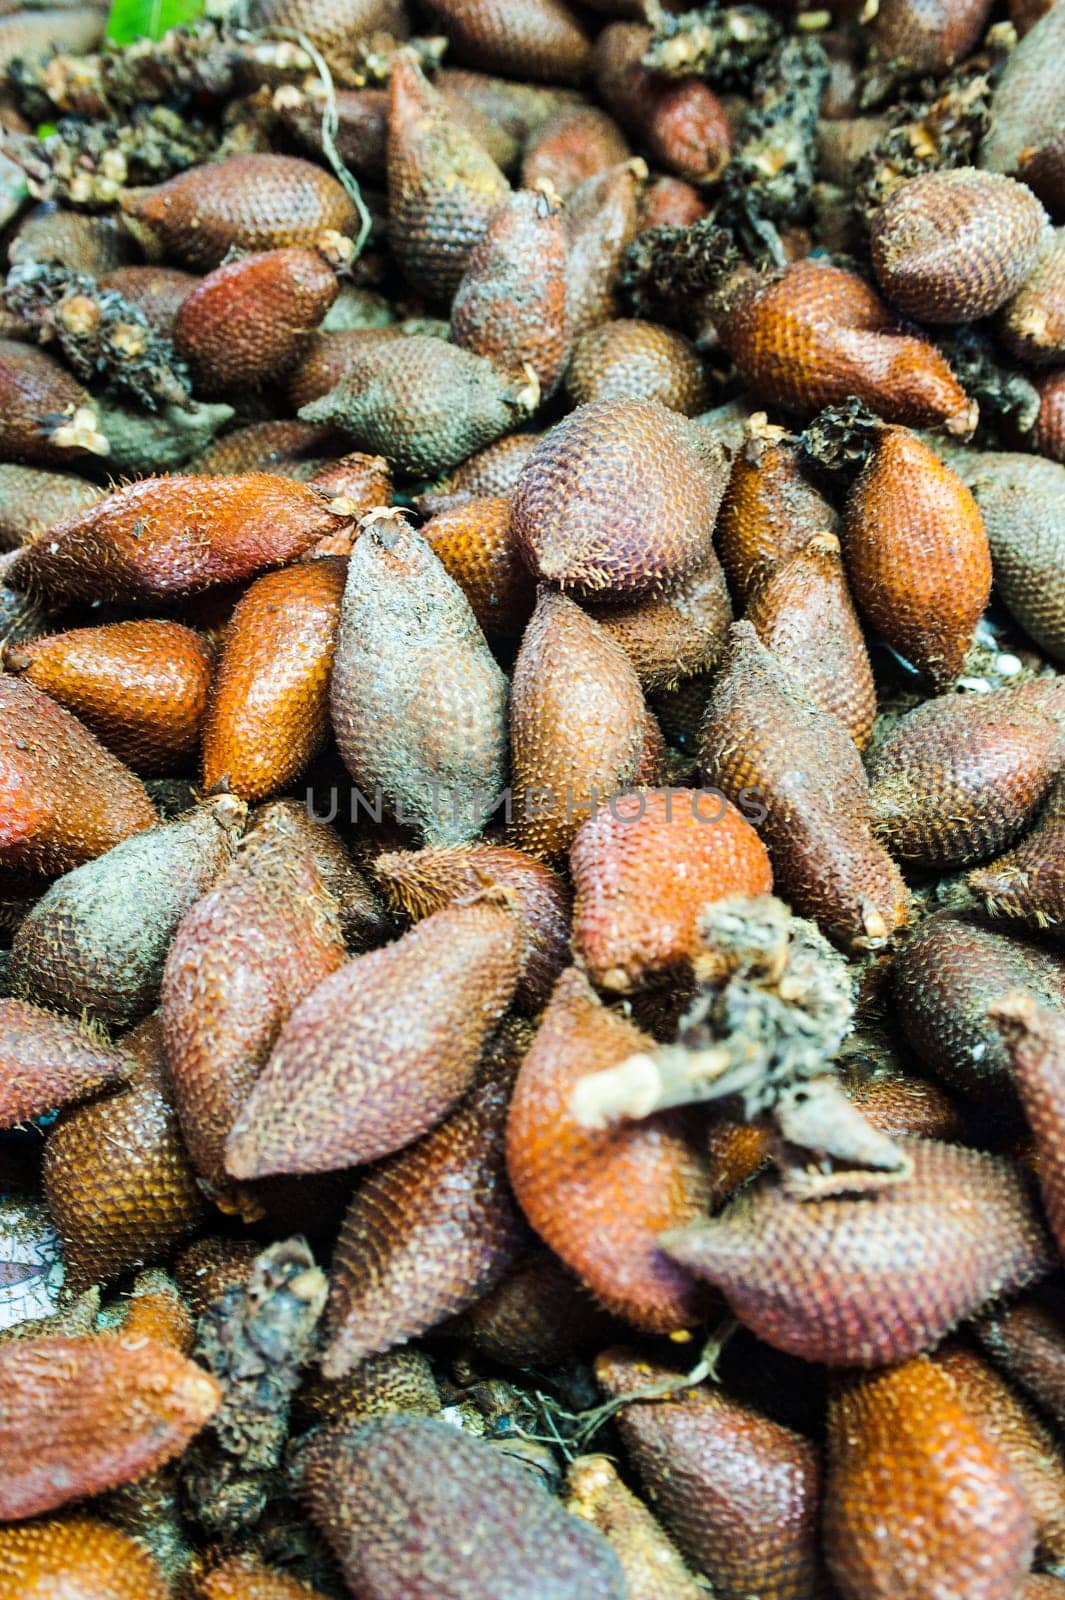 Salacca fruit at the vegetable market in Phuket, Thailand